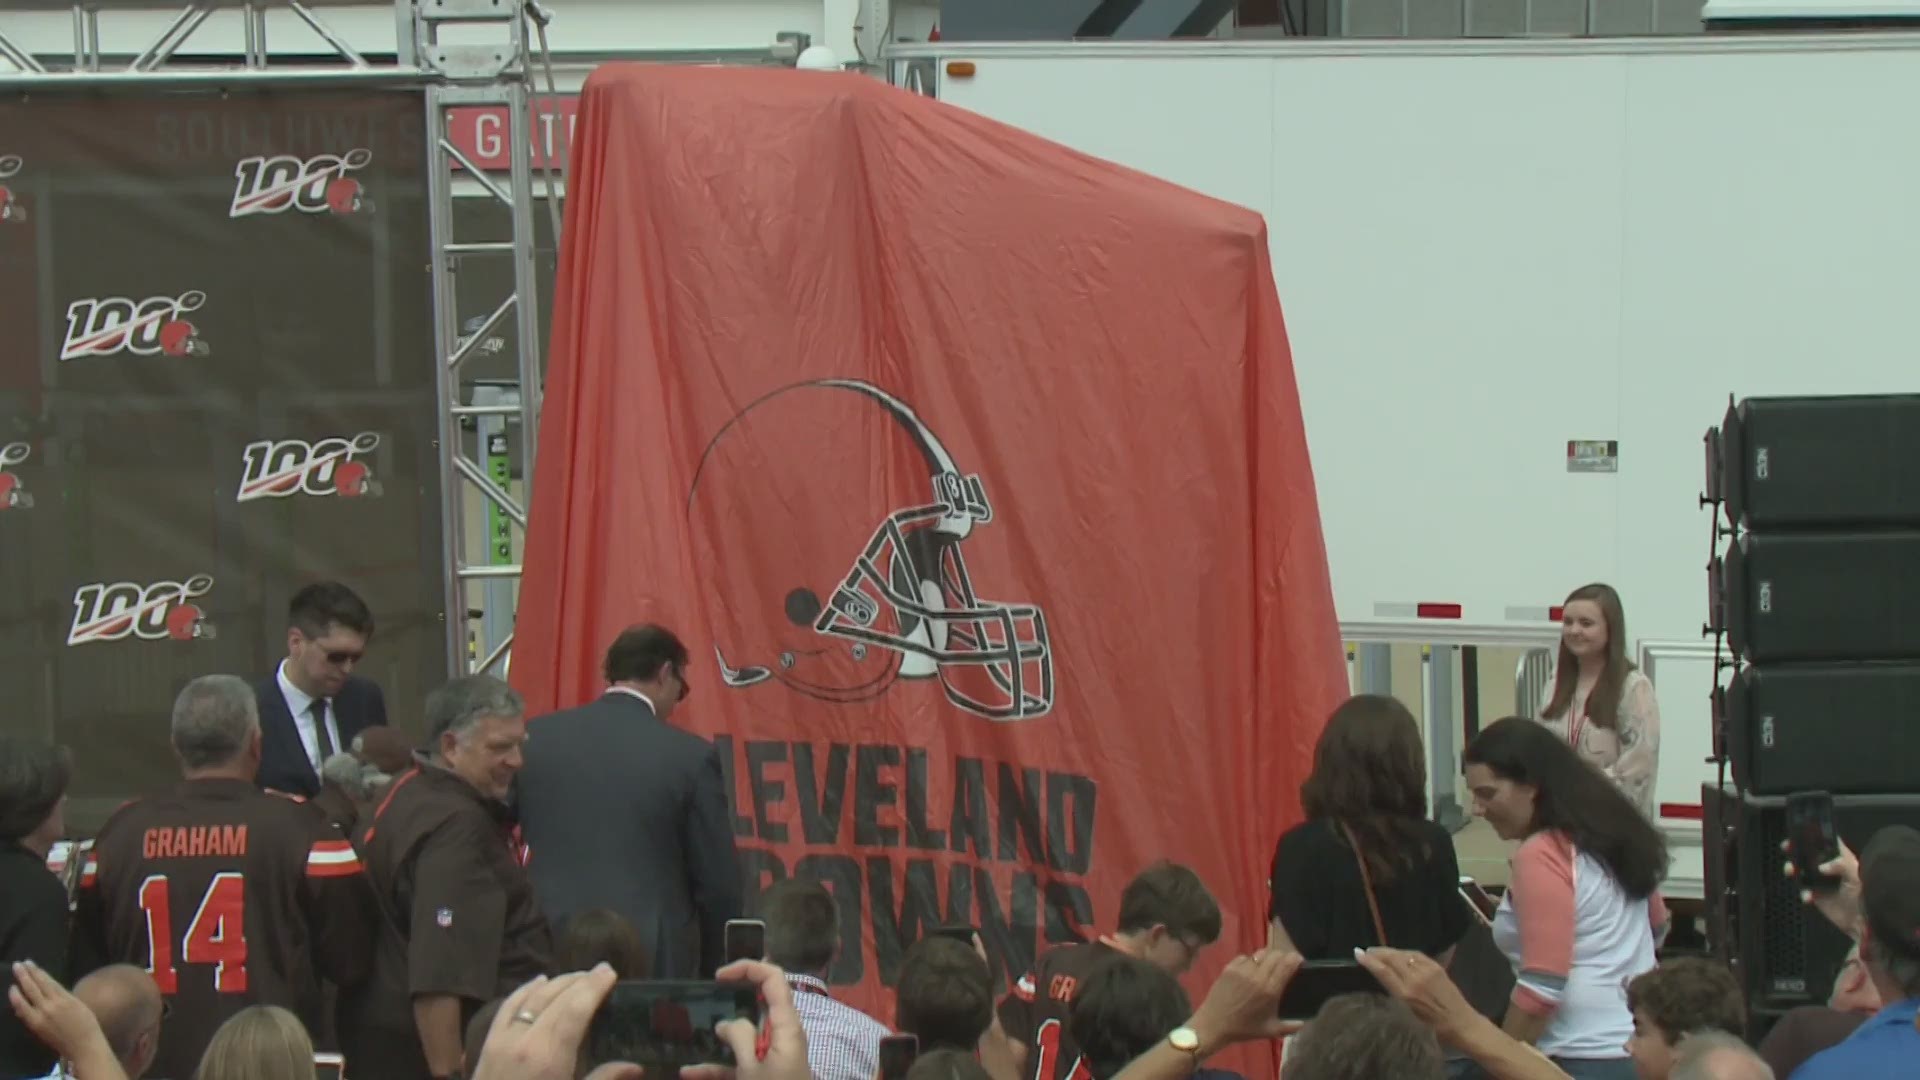 Nearly 40 of the Browns legend's family members were on hand for the special moment, including his 95-year-old wife, Beverly. Graham led Cleveland to seven championships and is widely regarded as one of the best players in football history.